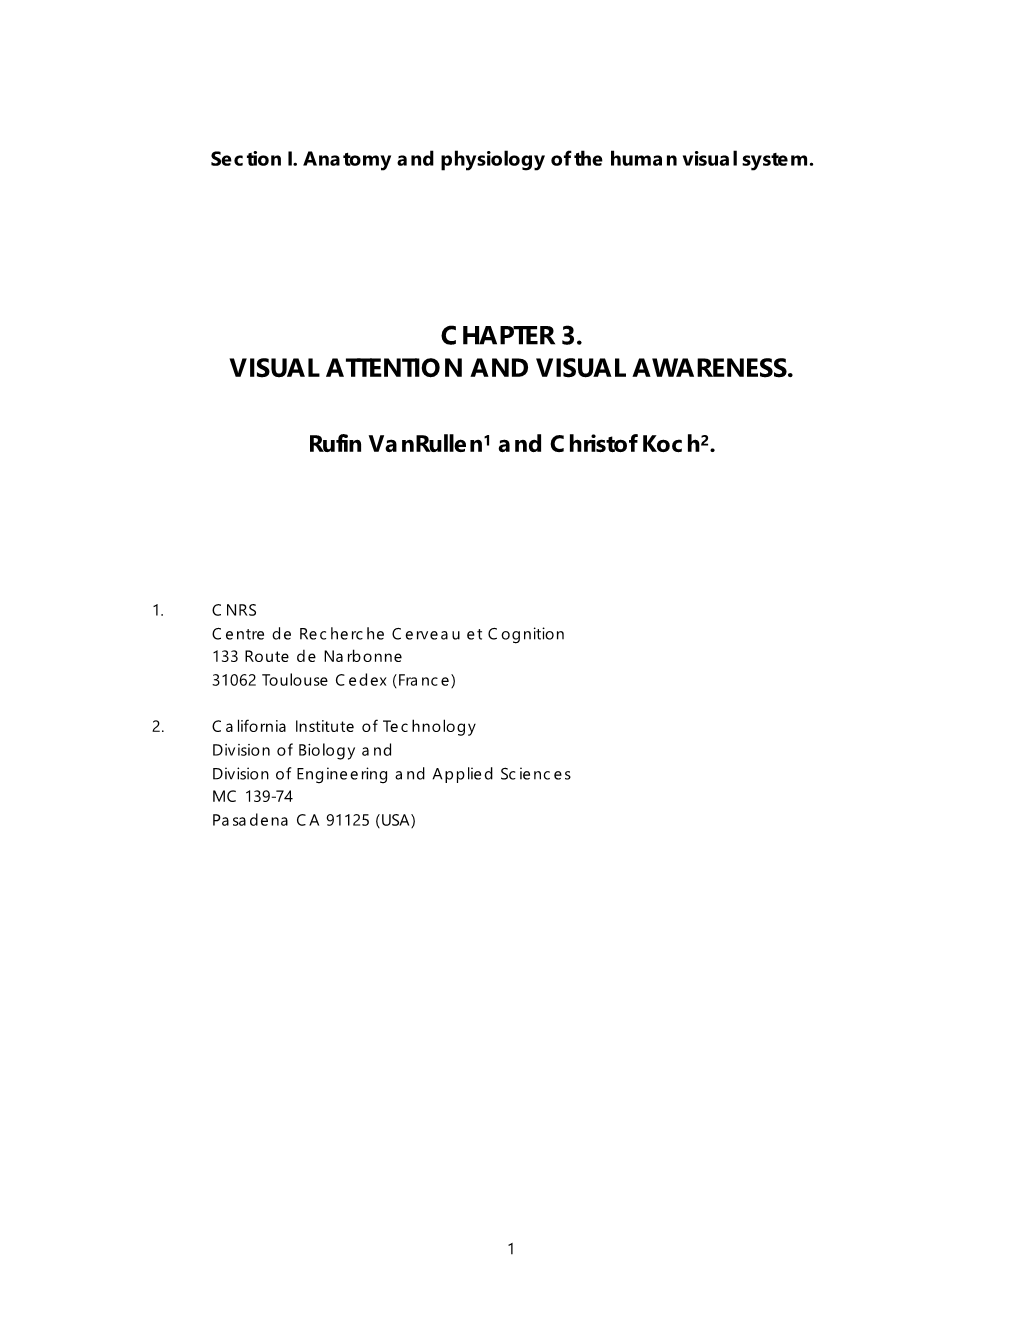 Chapter 3. Visual Attention and Visual Awareness